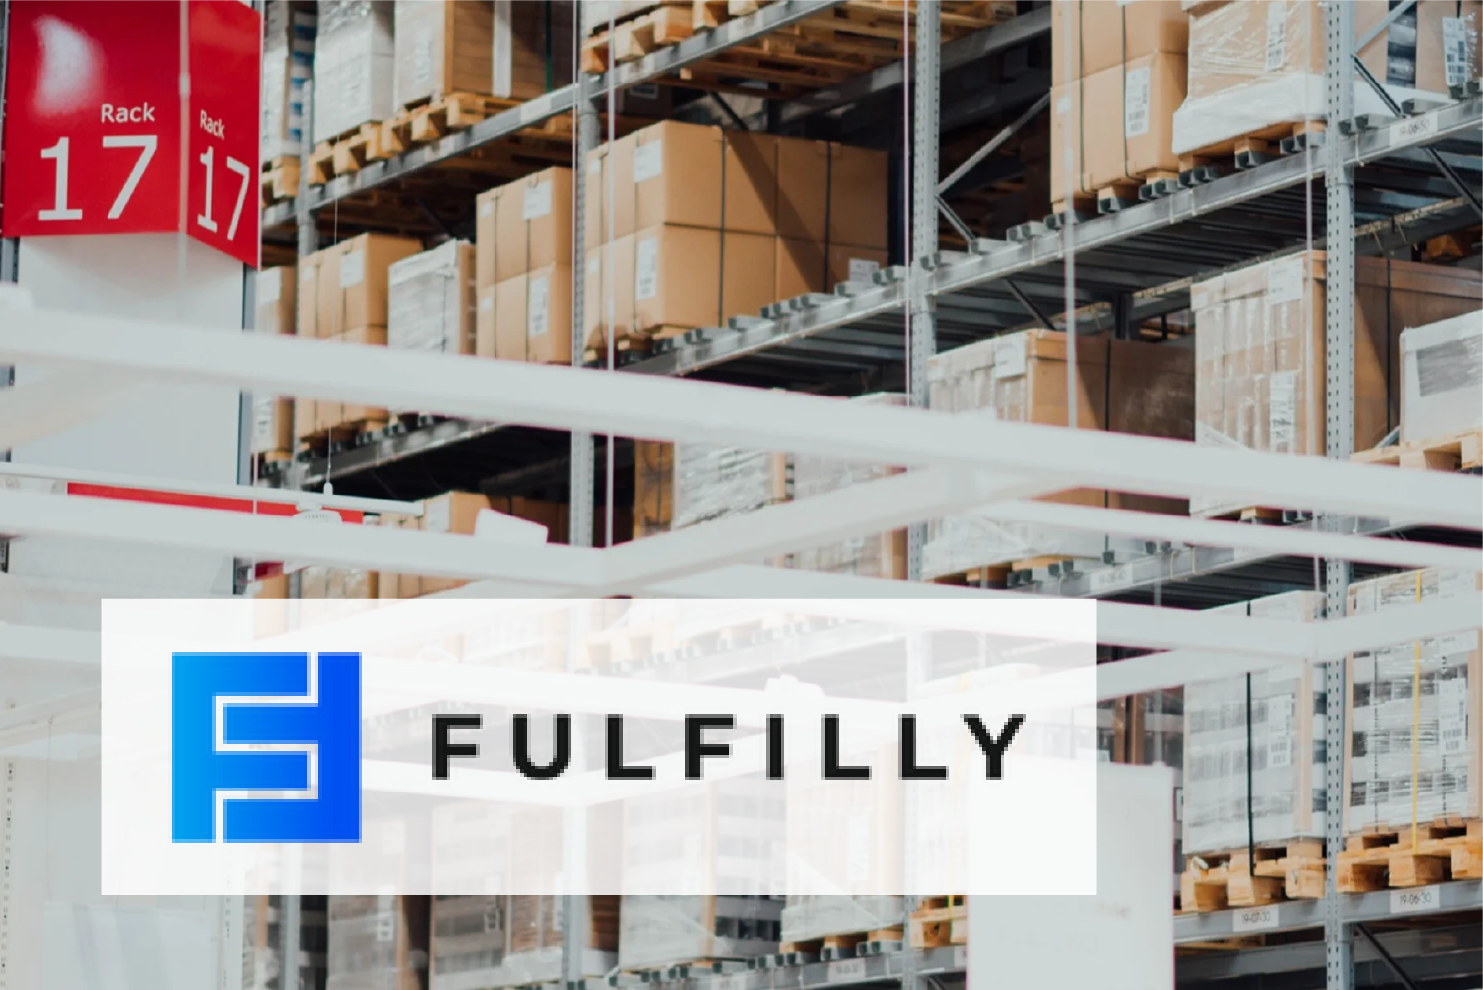 Fulfilly uses Ongoing WMS.